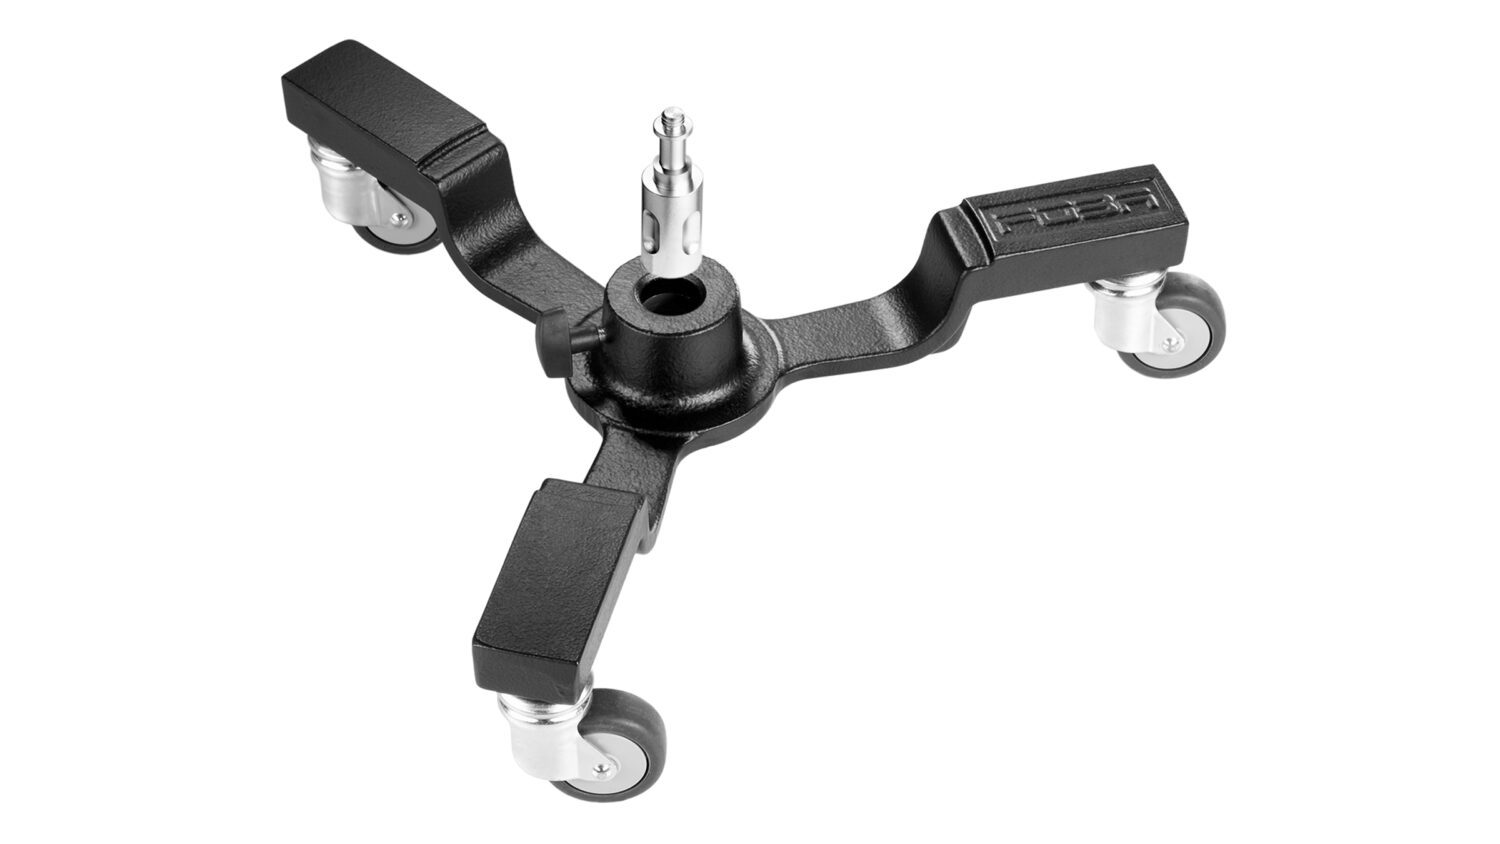 FOBA small dolly with camera adapter